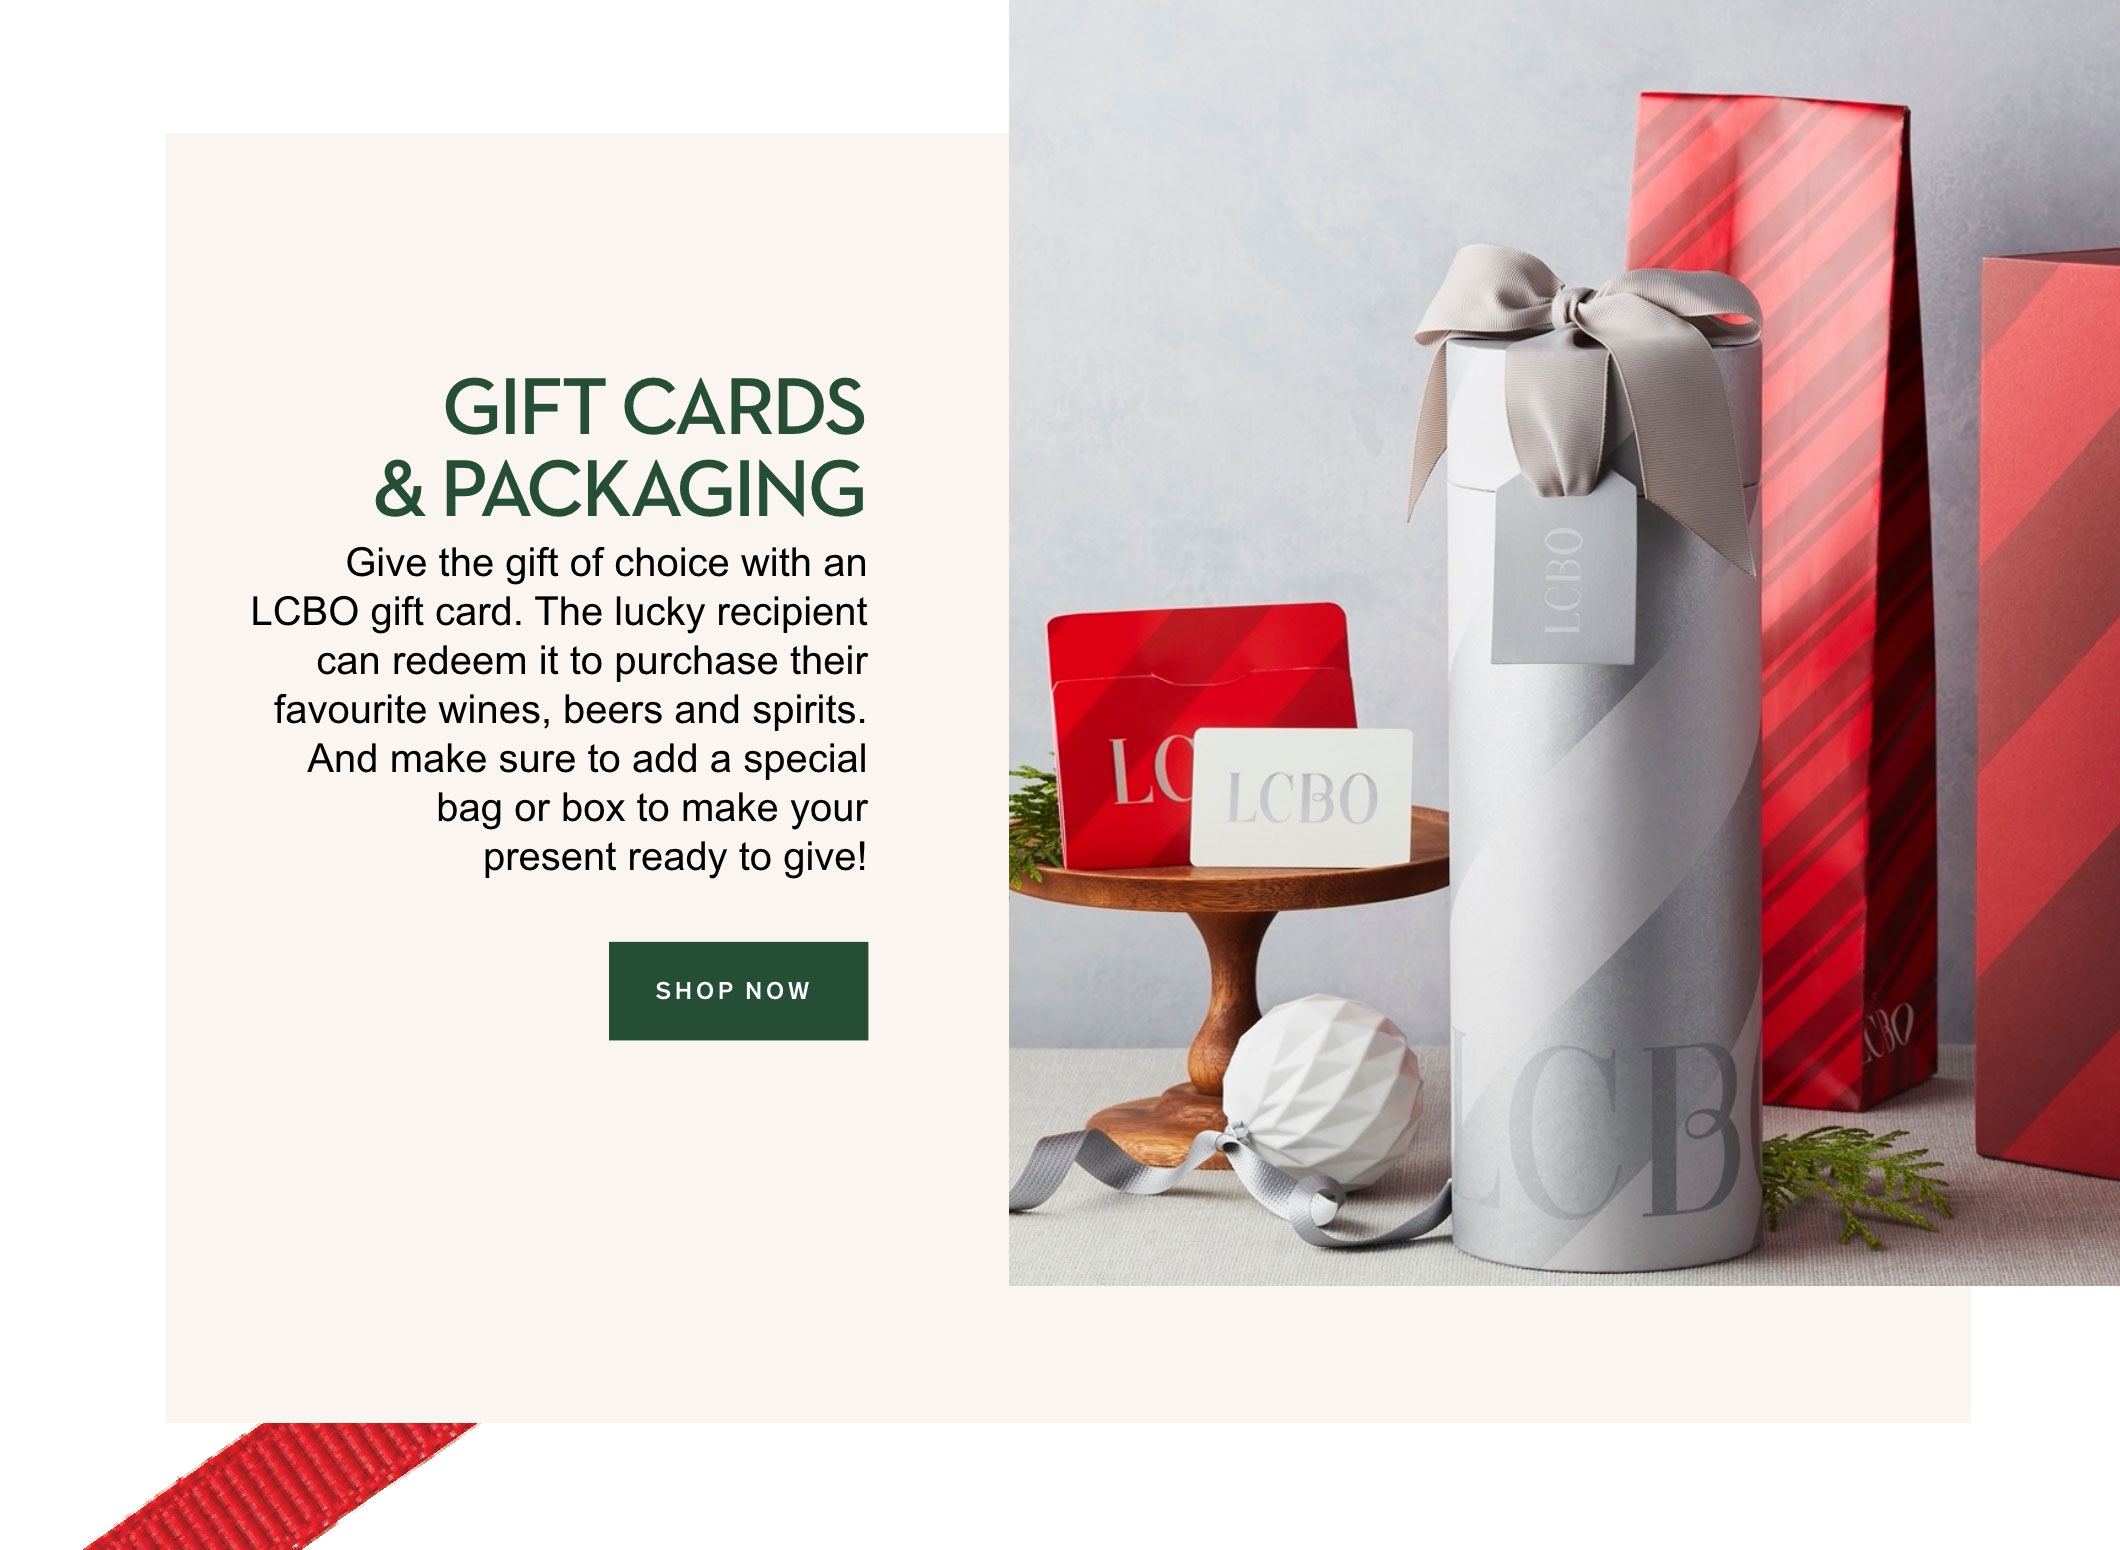 Shop Gift Cards & Packaging  Give the gift of choice with an LCBO gift card. The lucky recipient can redeem it to purchase their favourite wines, beers and spirits. And make sure to add a special bag or box to make your present ready to give! 